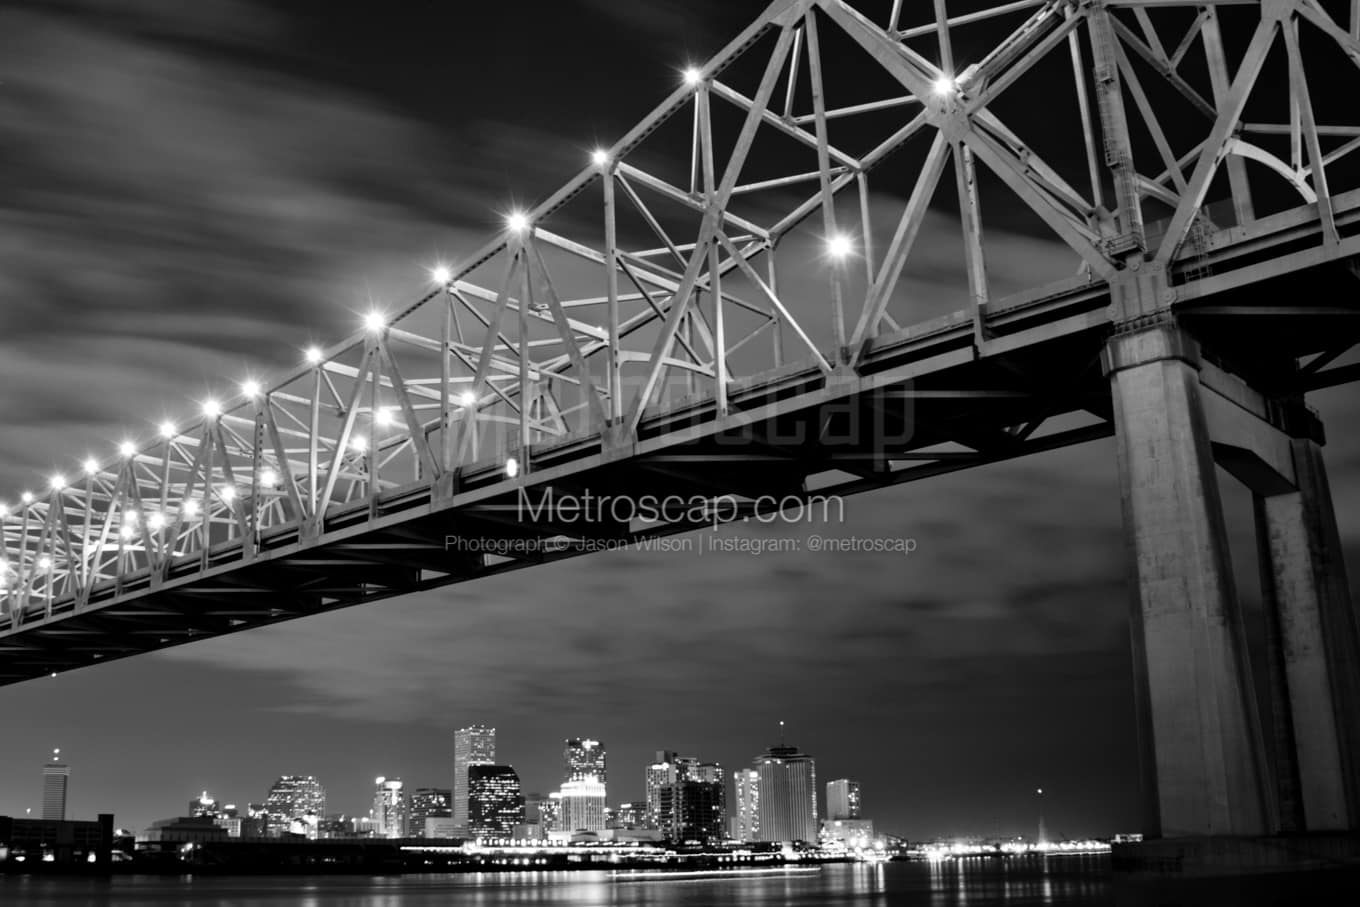 Black & White New Orleans Architecture Pictures